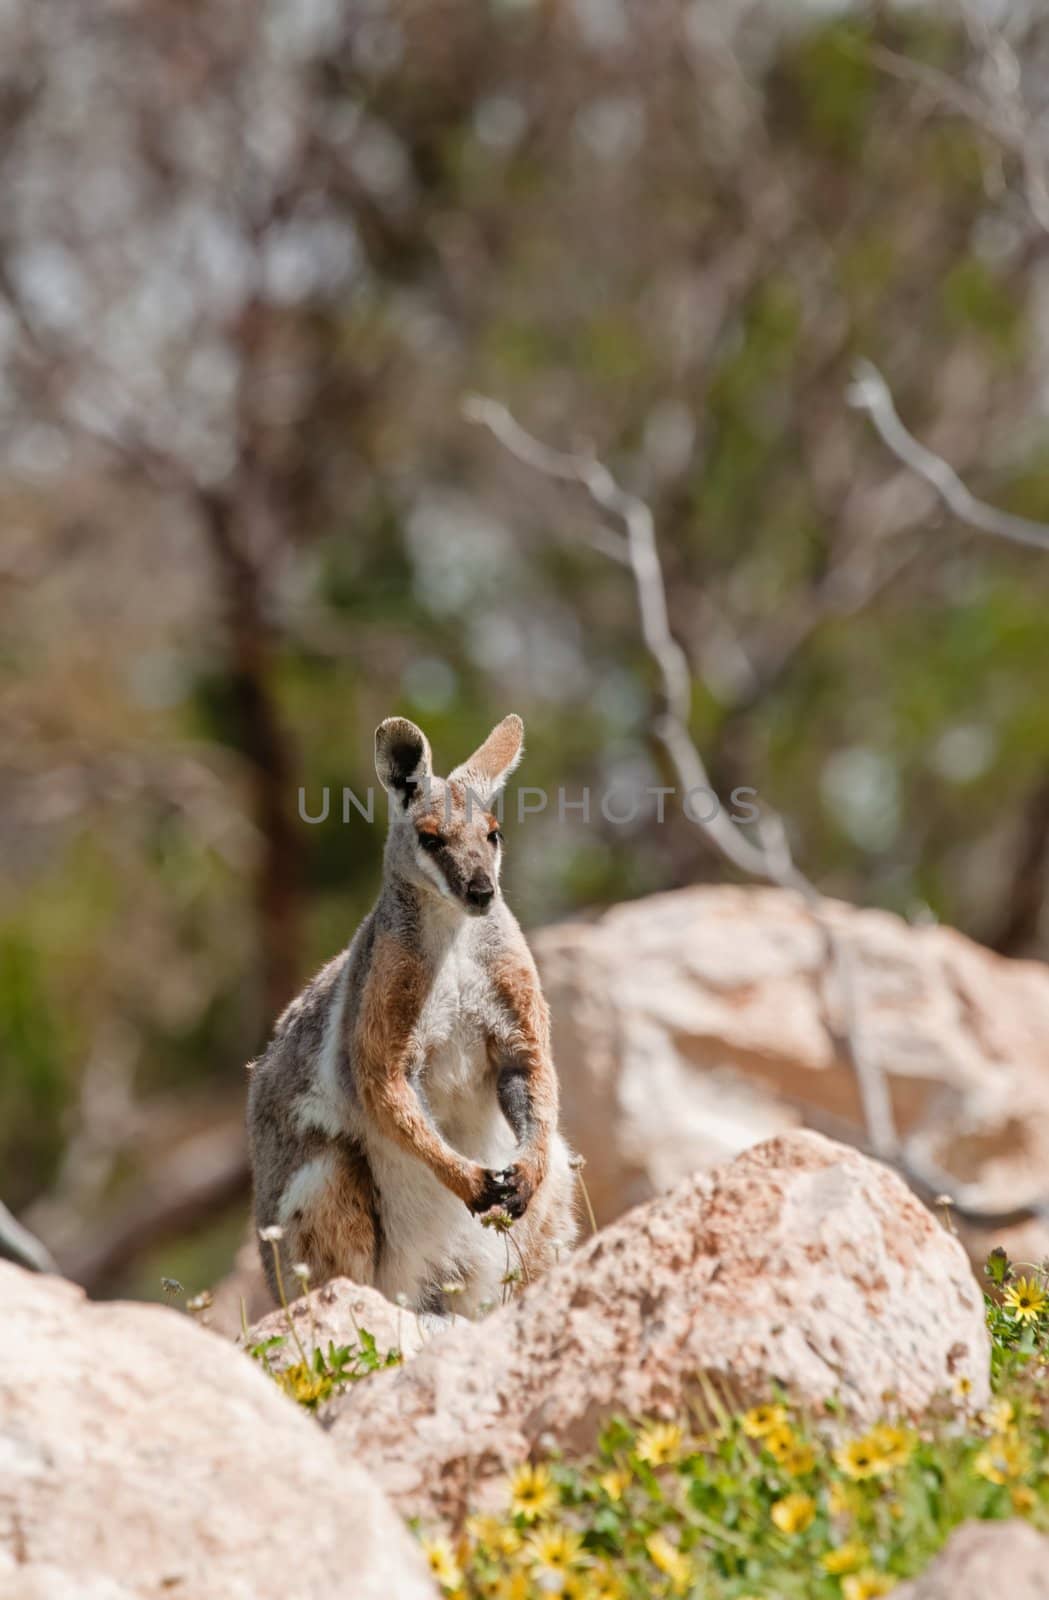 yellow footed rock wallaby by clearviewstock